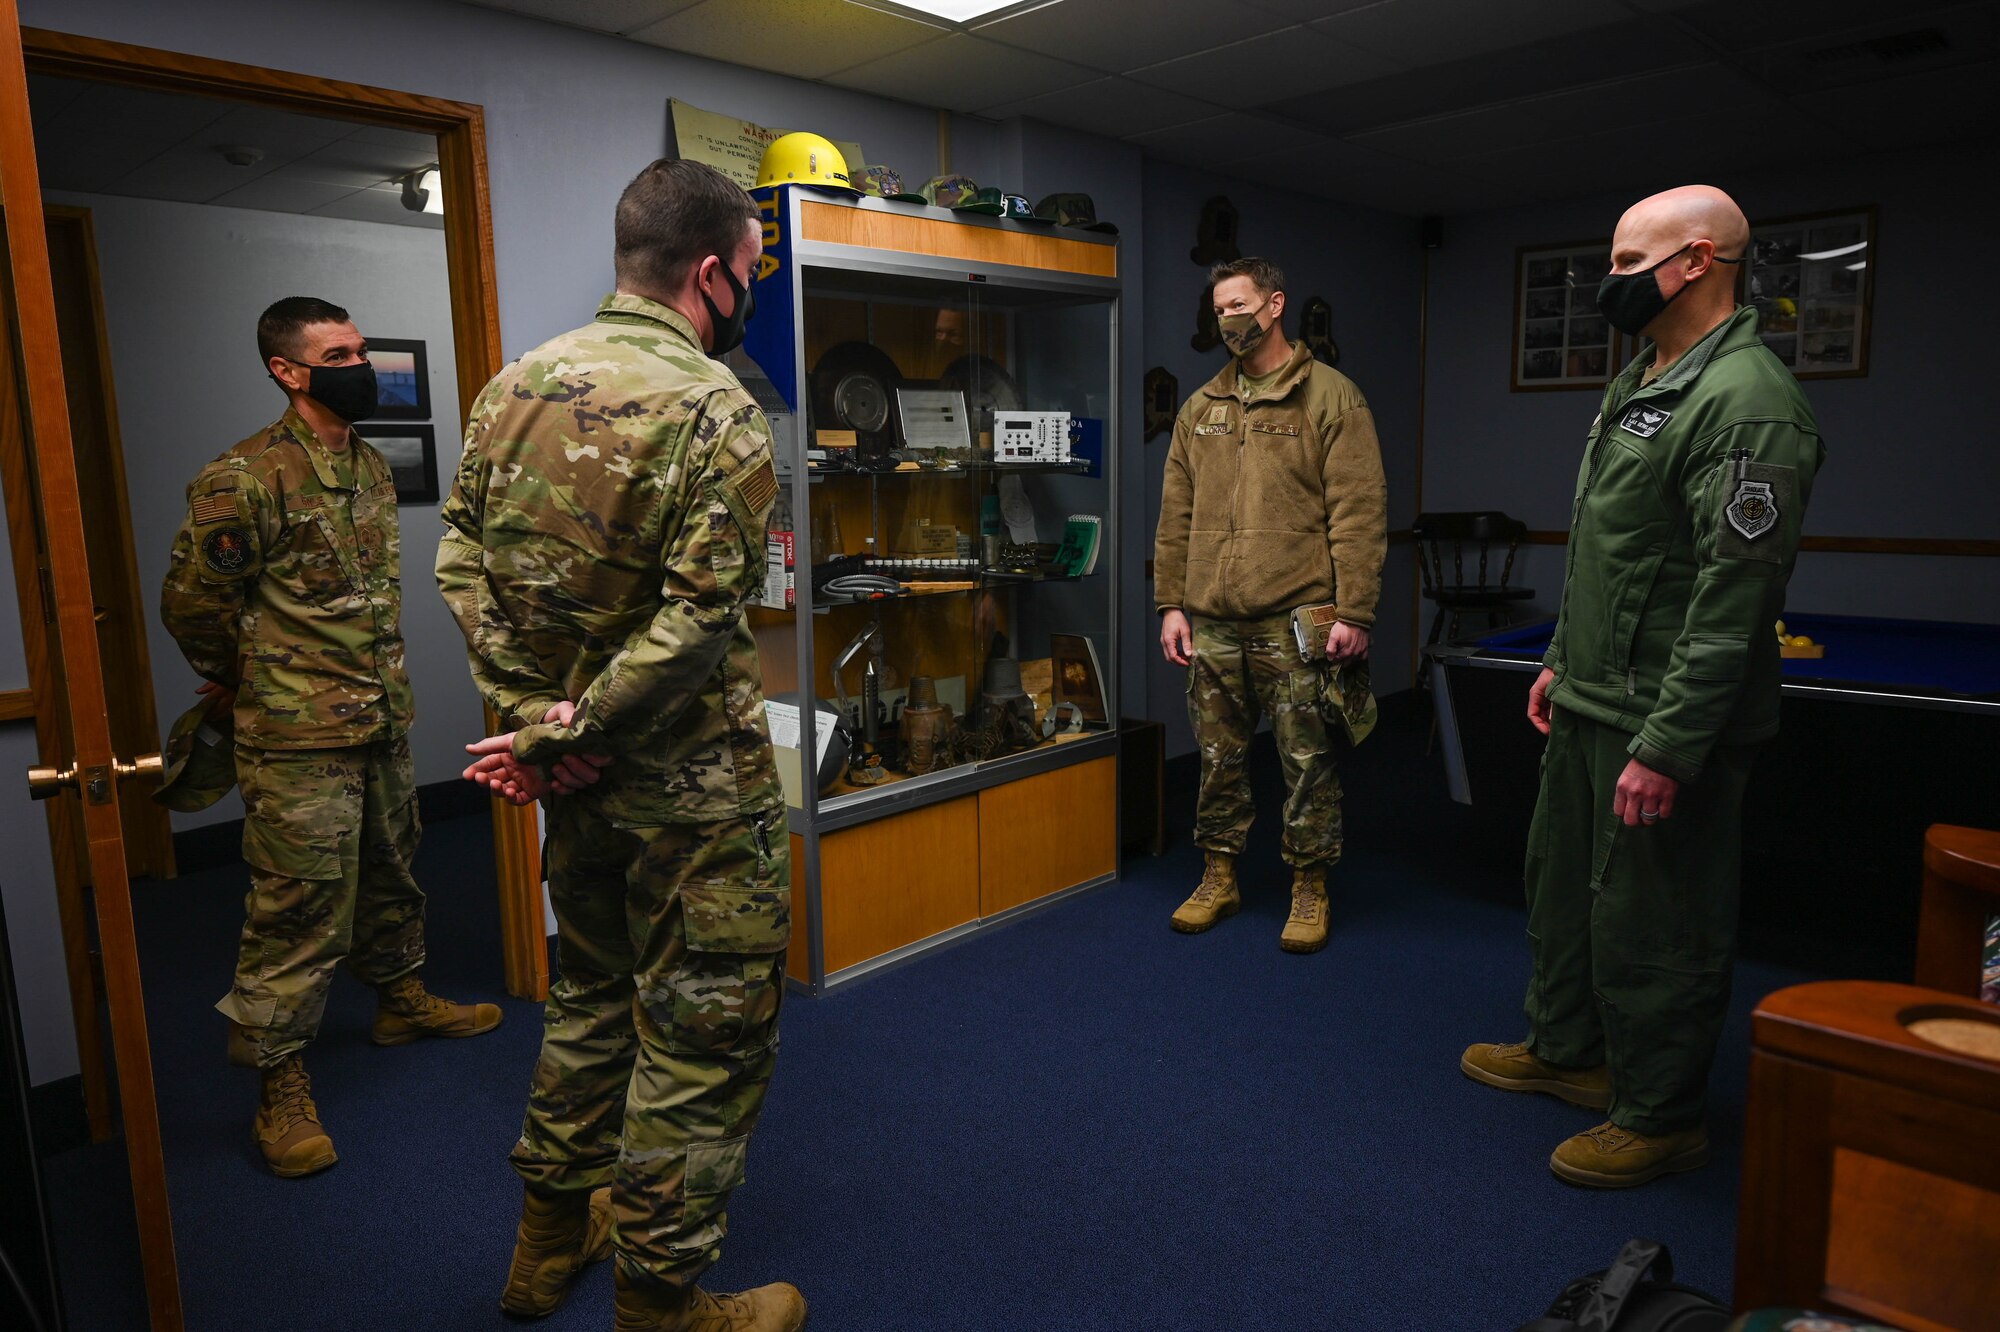 U.S. Air Force Senior Master Sgt. Aaron Boyle, left, the 709th Technical Maintenance Squadron (TMXS), Detachment 460 chief, and Staff Sgt. Robert Stone, a 709th TMXS field maintenance supervisor, speak with Chief Master Sgt. John Lokken, the 354th Fighter Wing (FW) command chief, and Col. David Berkland, the 354th FW commander, during a leadership immersion on Eielson Air Force Base, Alaska, March 11, 2021.